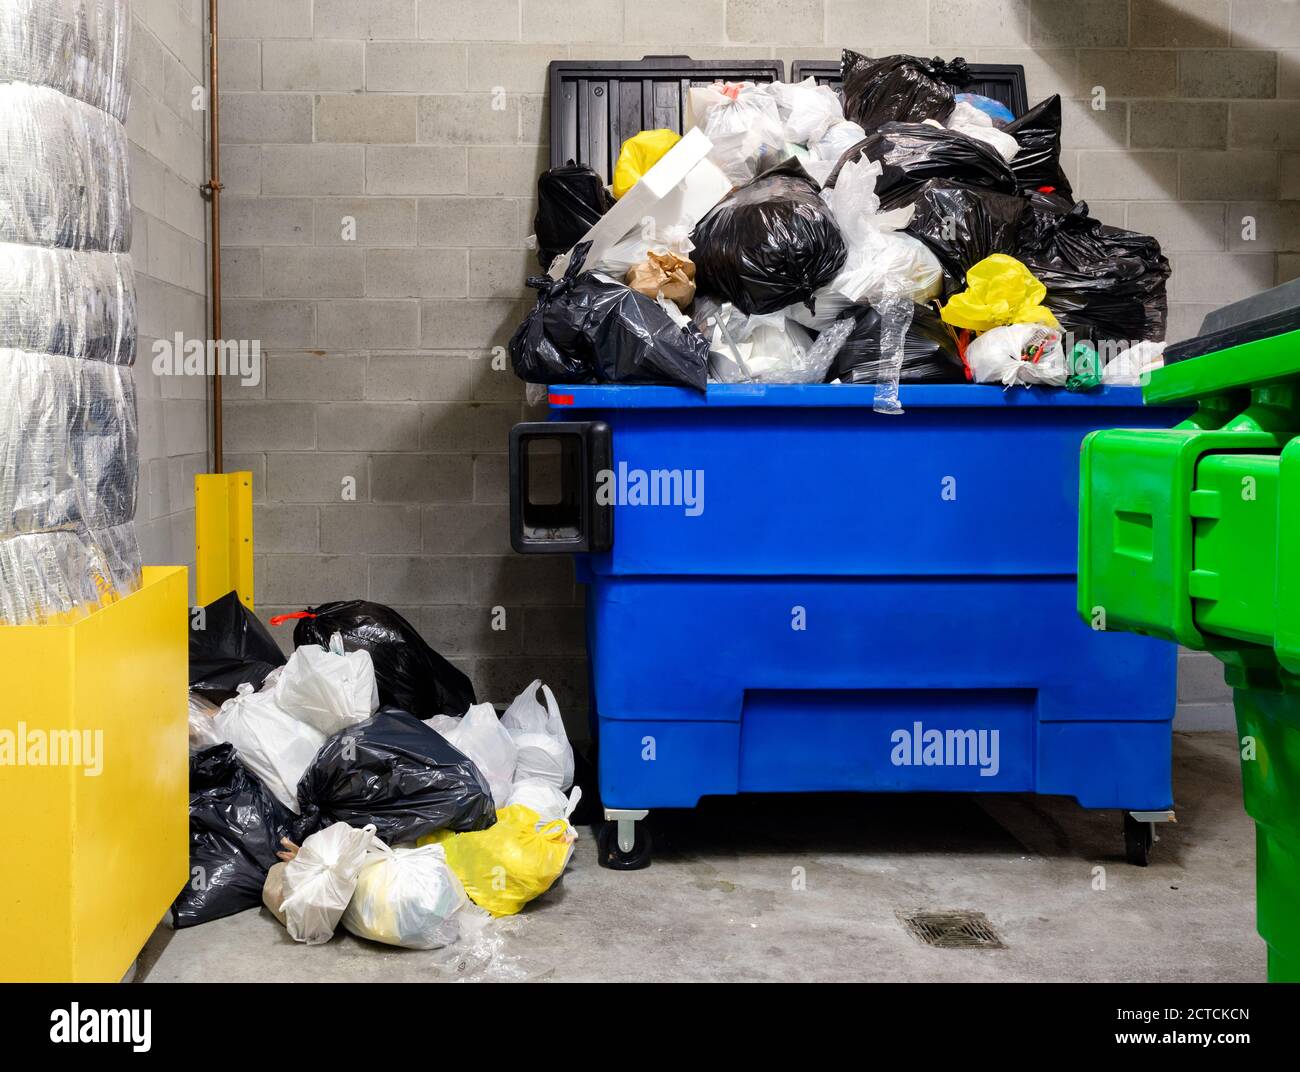 Overloaded household garbage container in garbage room of residential building. Waste management company has missed pickup due to snowstorm. Stock Photo